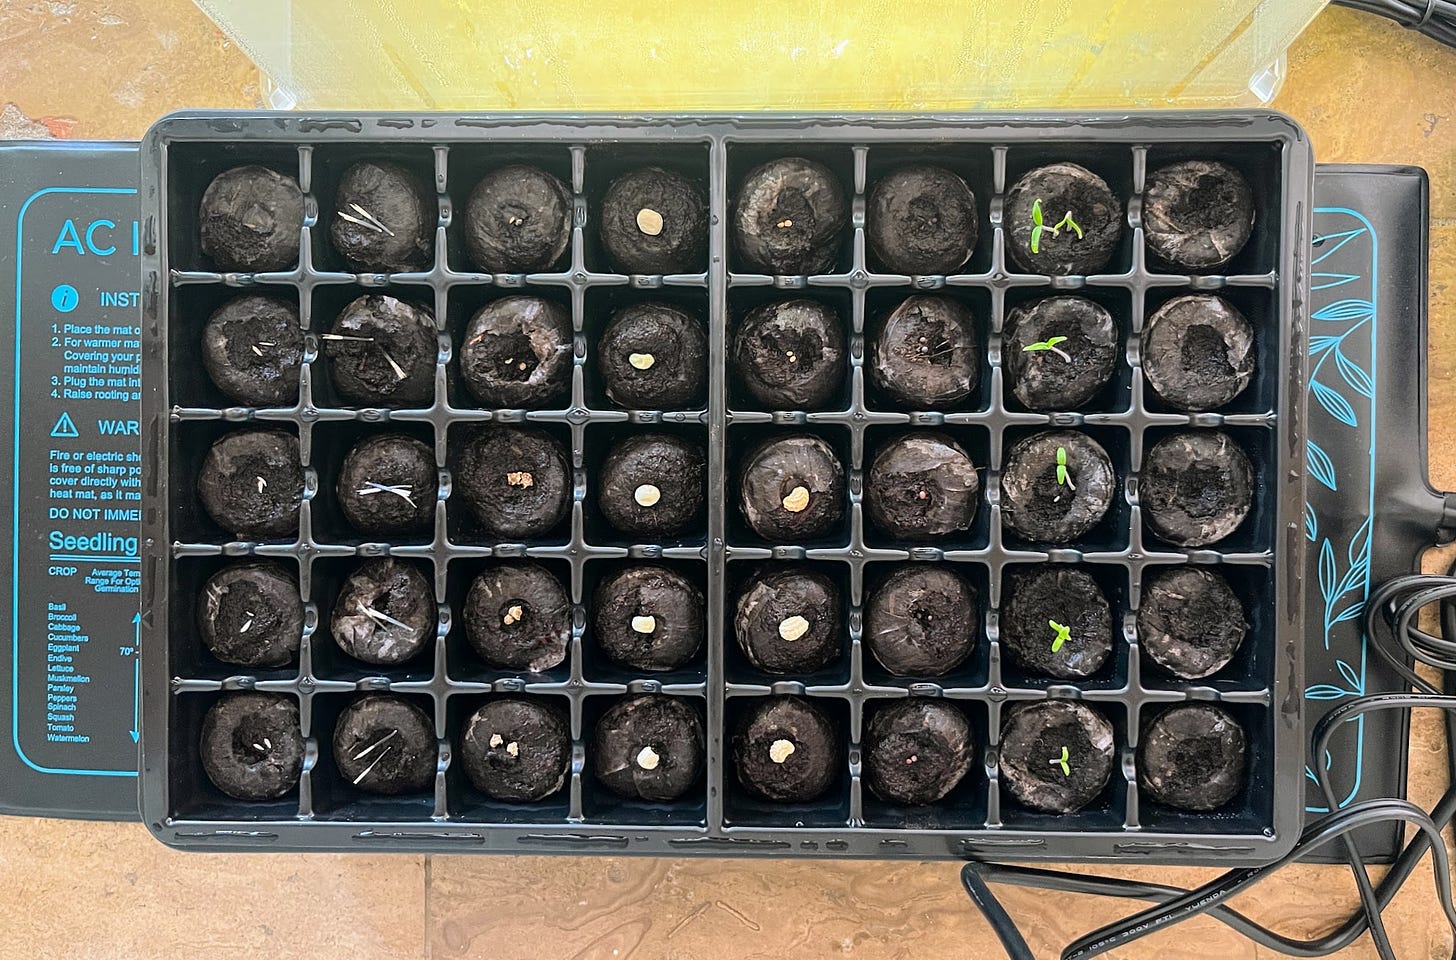 Seed starting tray on a heating mat